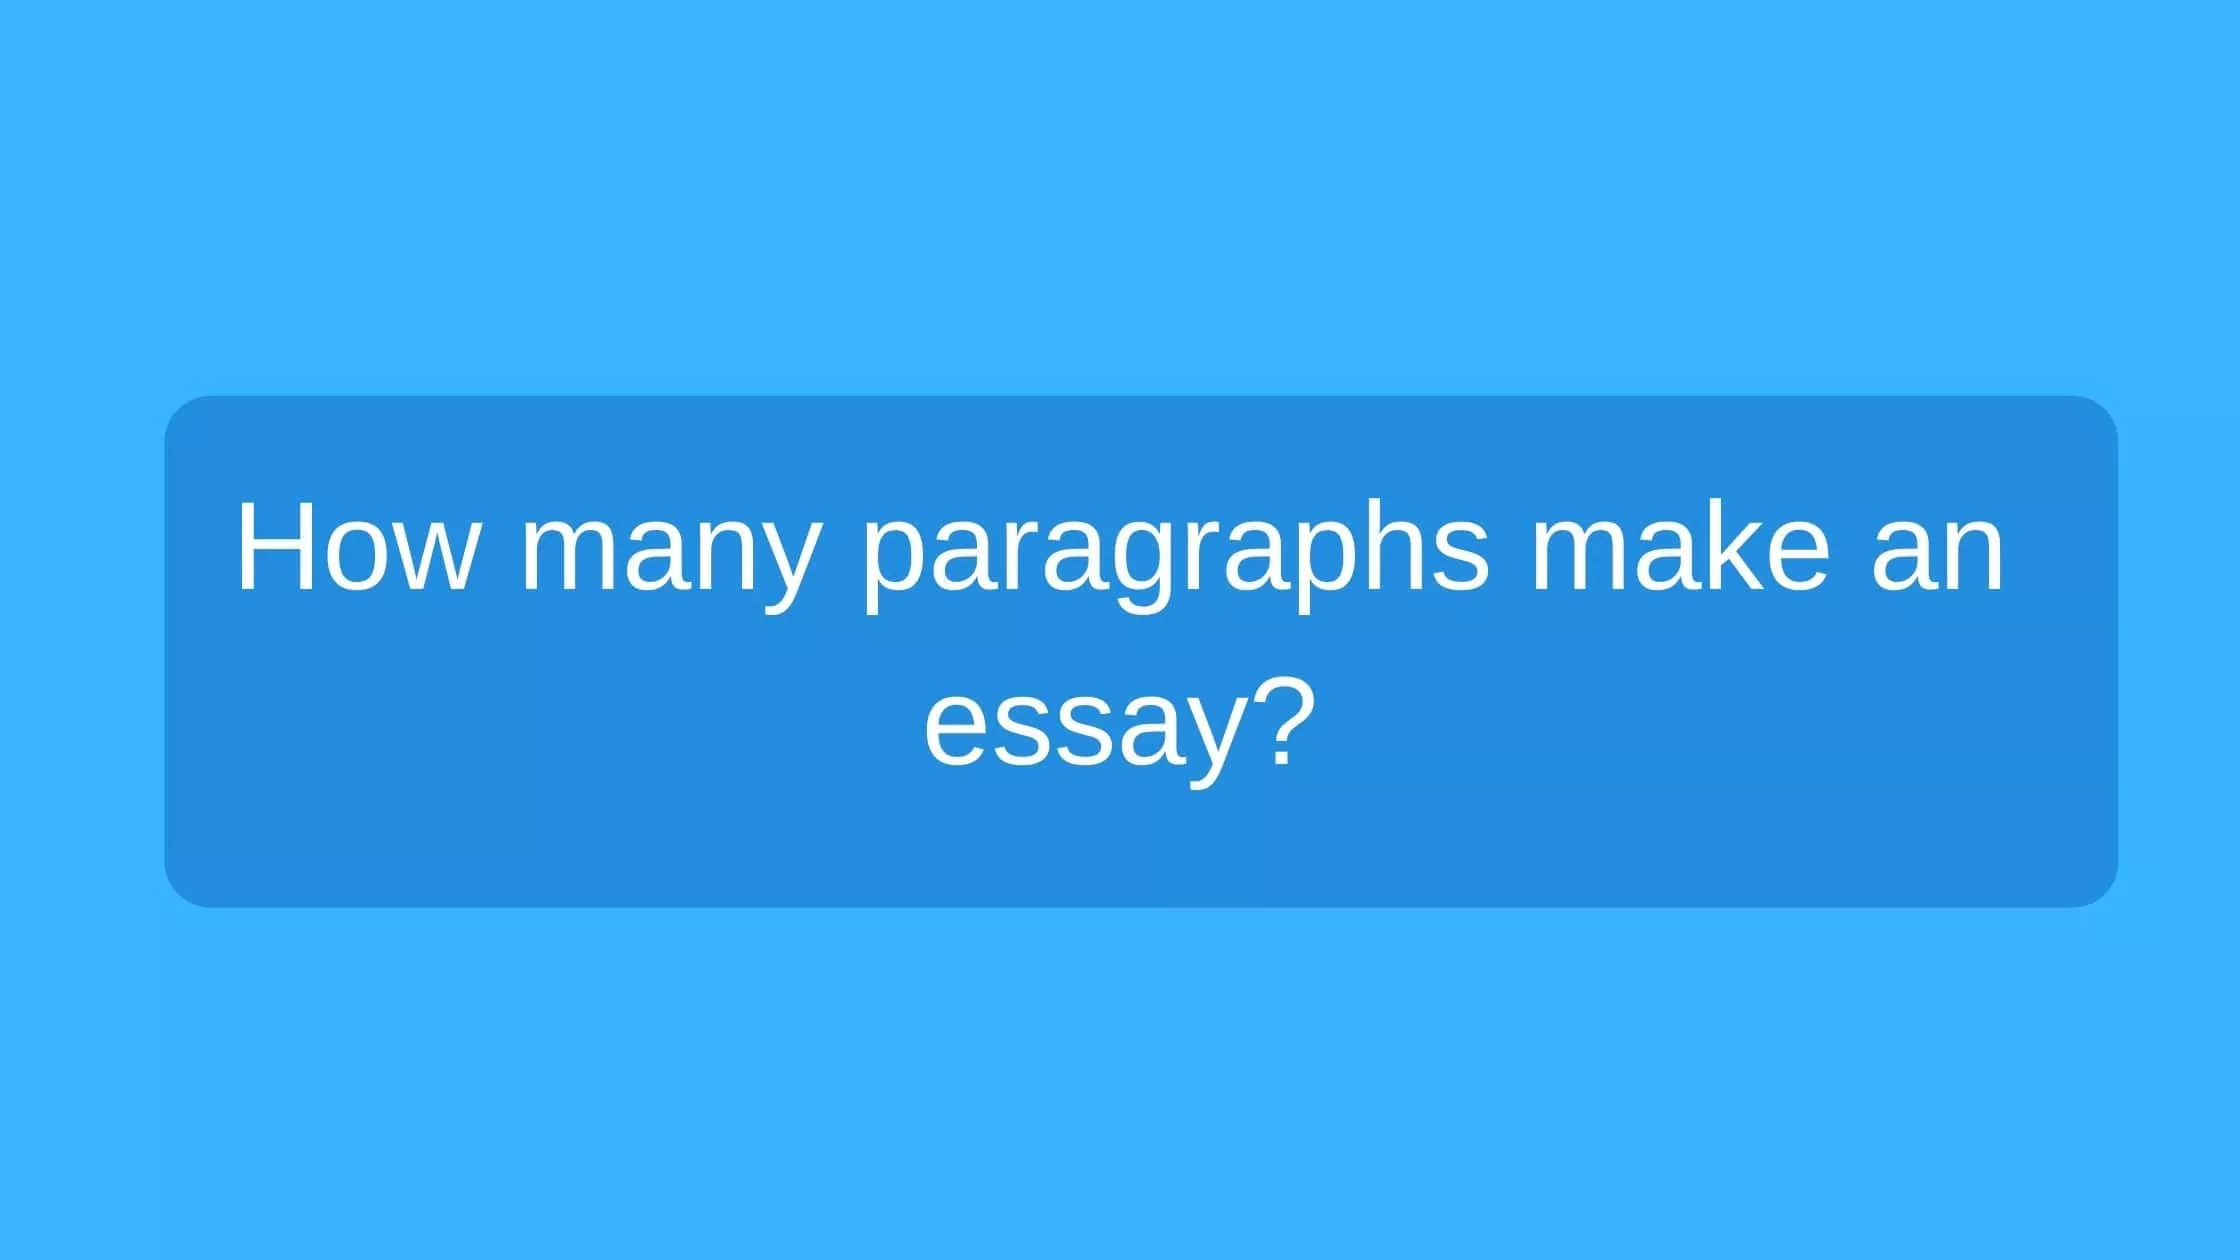 How many paragraphs in an essay